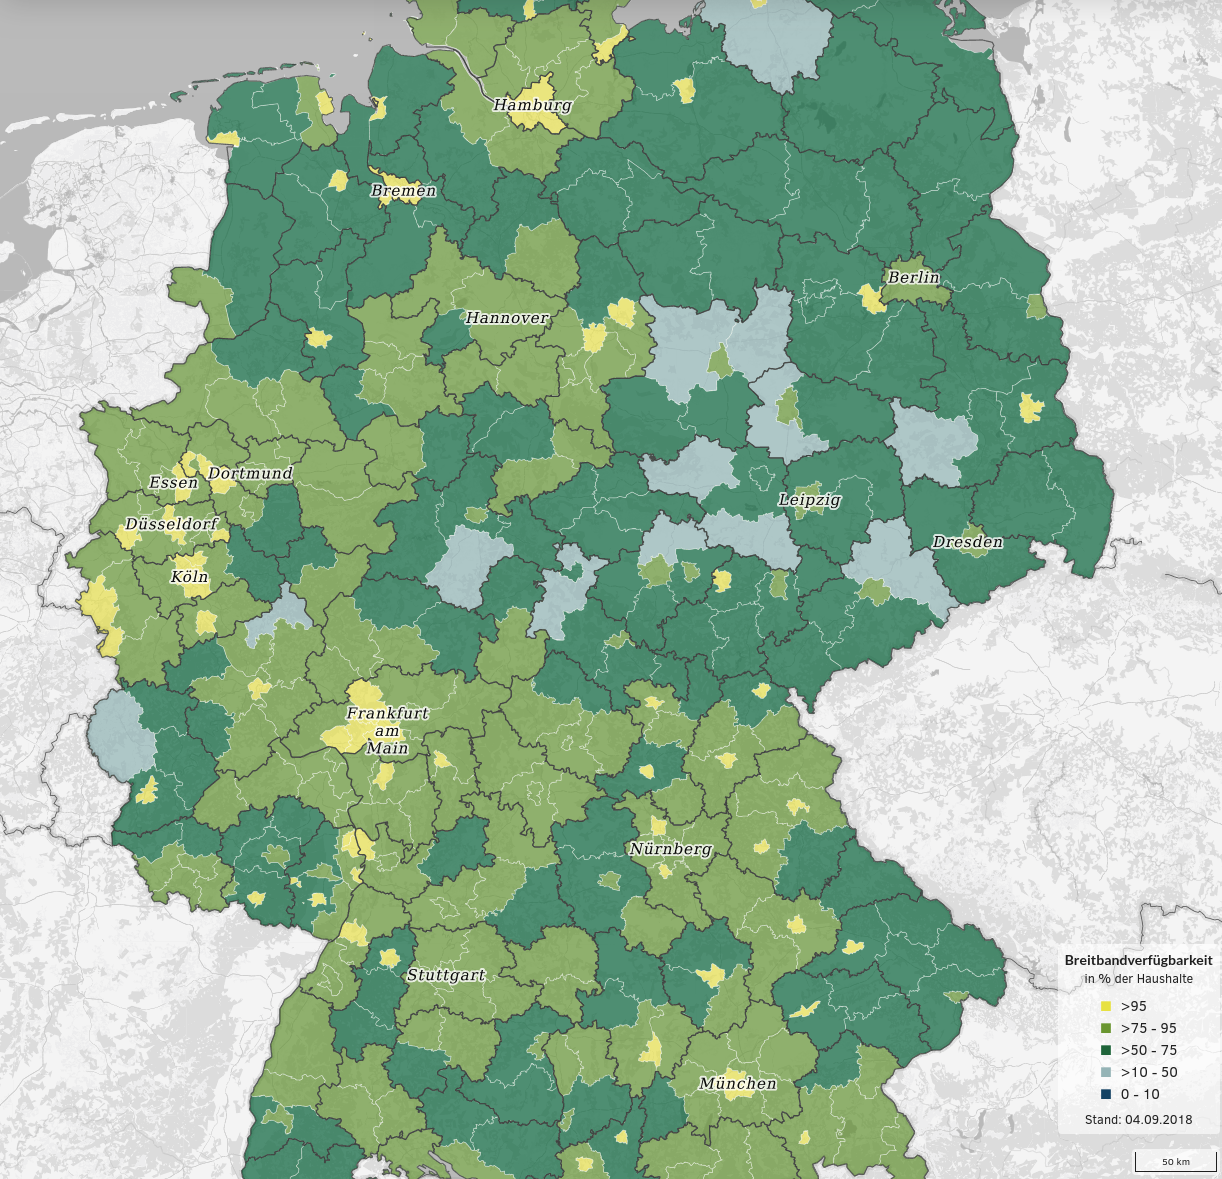 Private broadband availability from 50 Mbit/s: Urban areas mostly range between 75 and 100% with light green and yellow - More rural areas are generally less well connected.